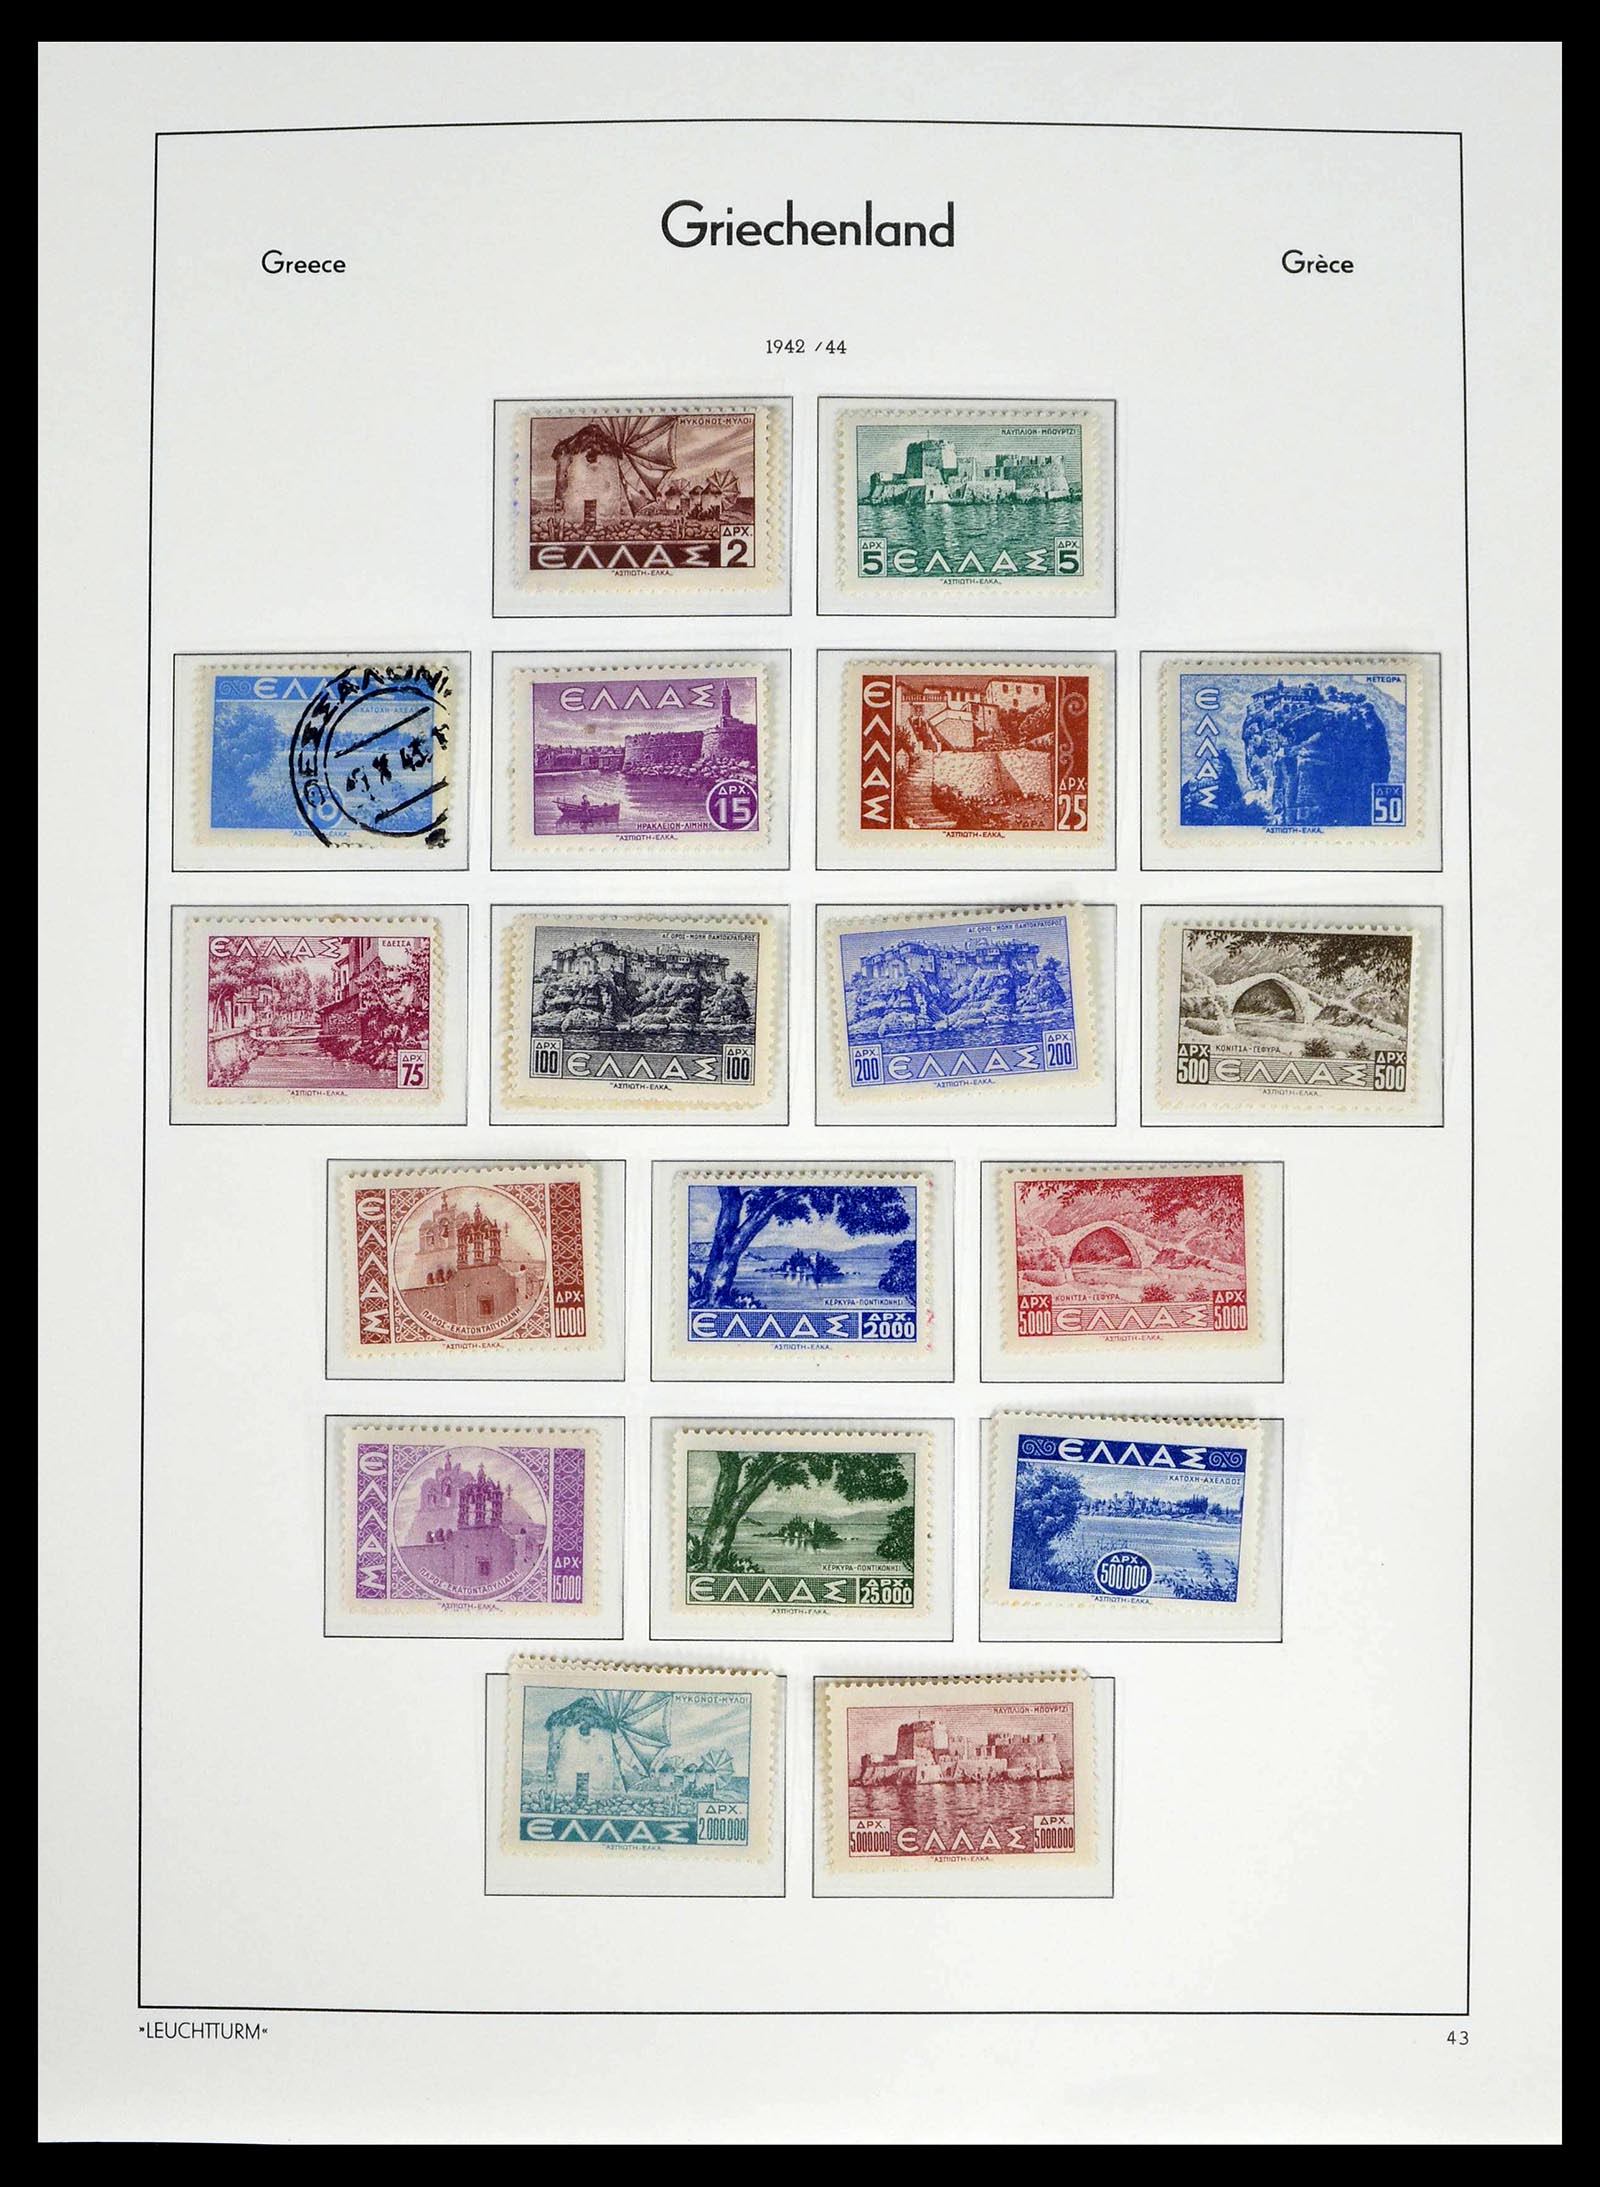 39243 0038 - Stamp collection 39243 Greece 1861-1965.